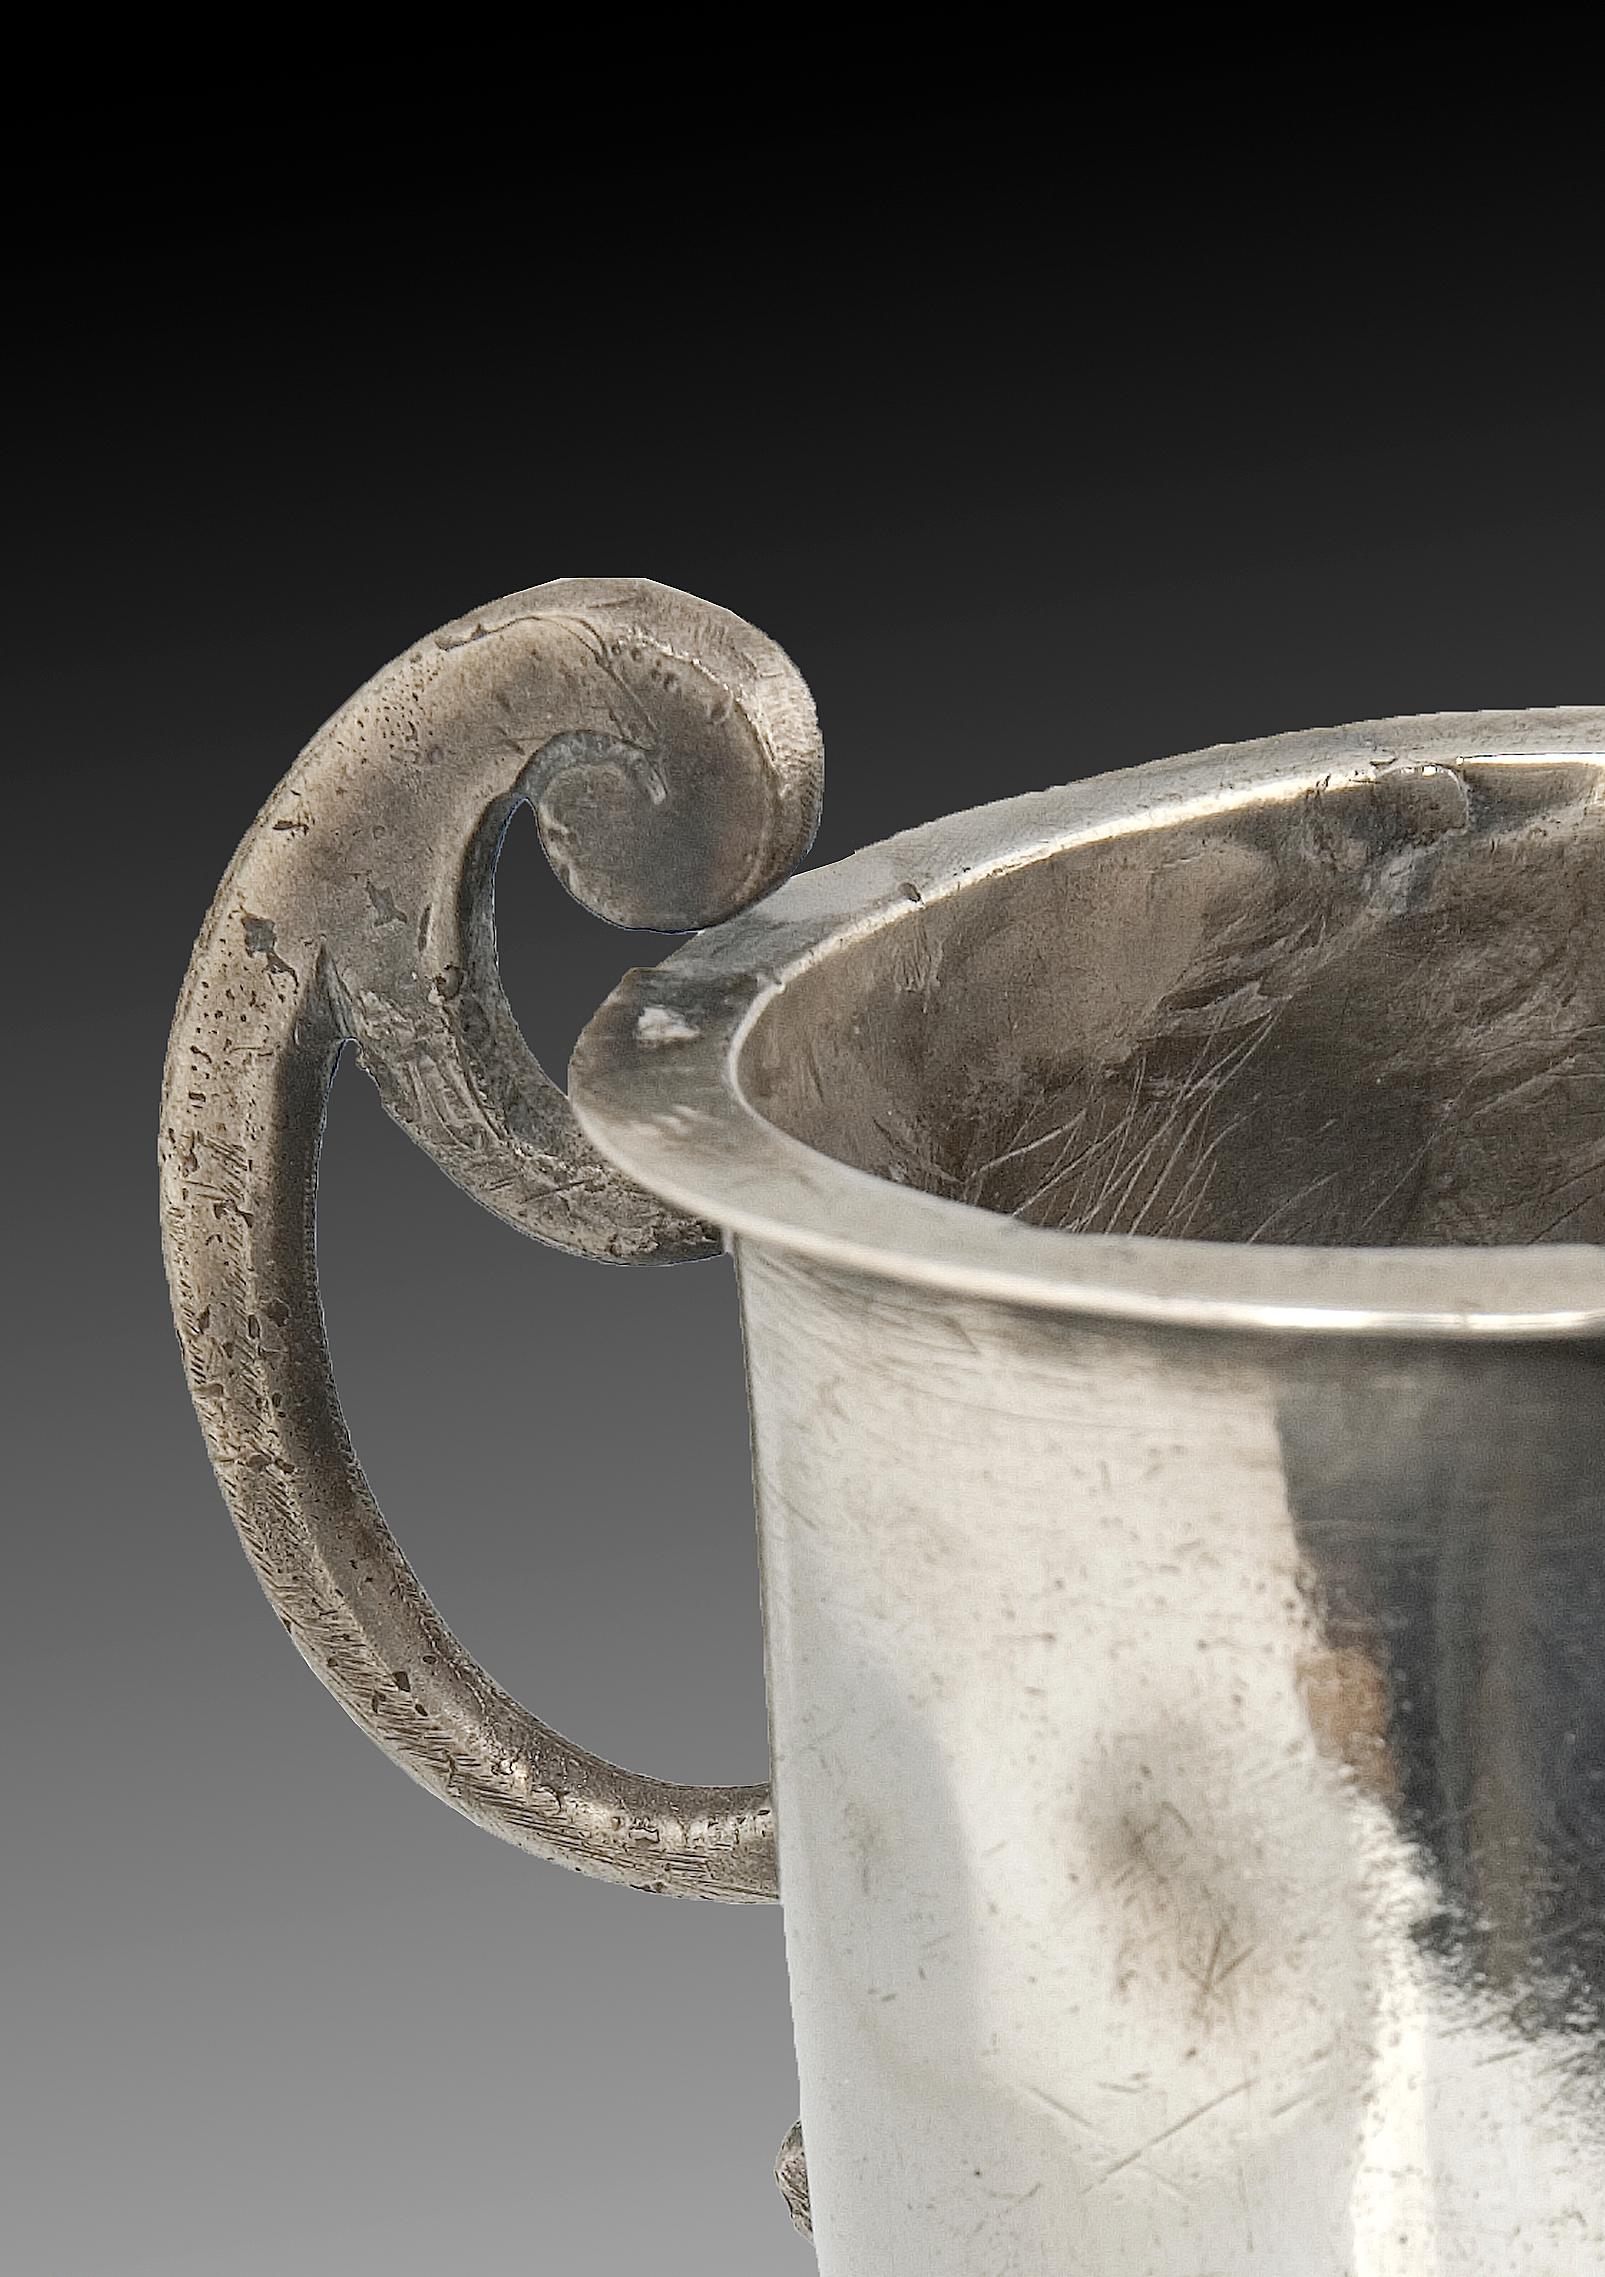 Silver beak jug, 17th century.
On a circular foot stands the smooth beak jug, with the handle in the form of a “C” with the branch that is common to see in this type circa 1930s and 1940s of the 17th century. Typologically, it belongs to the